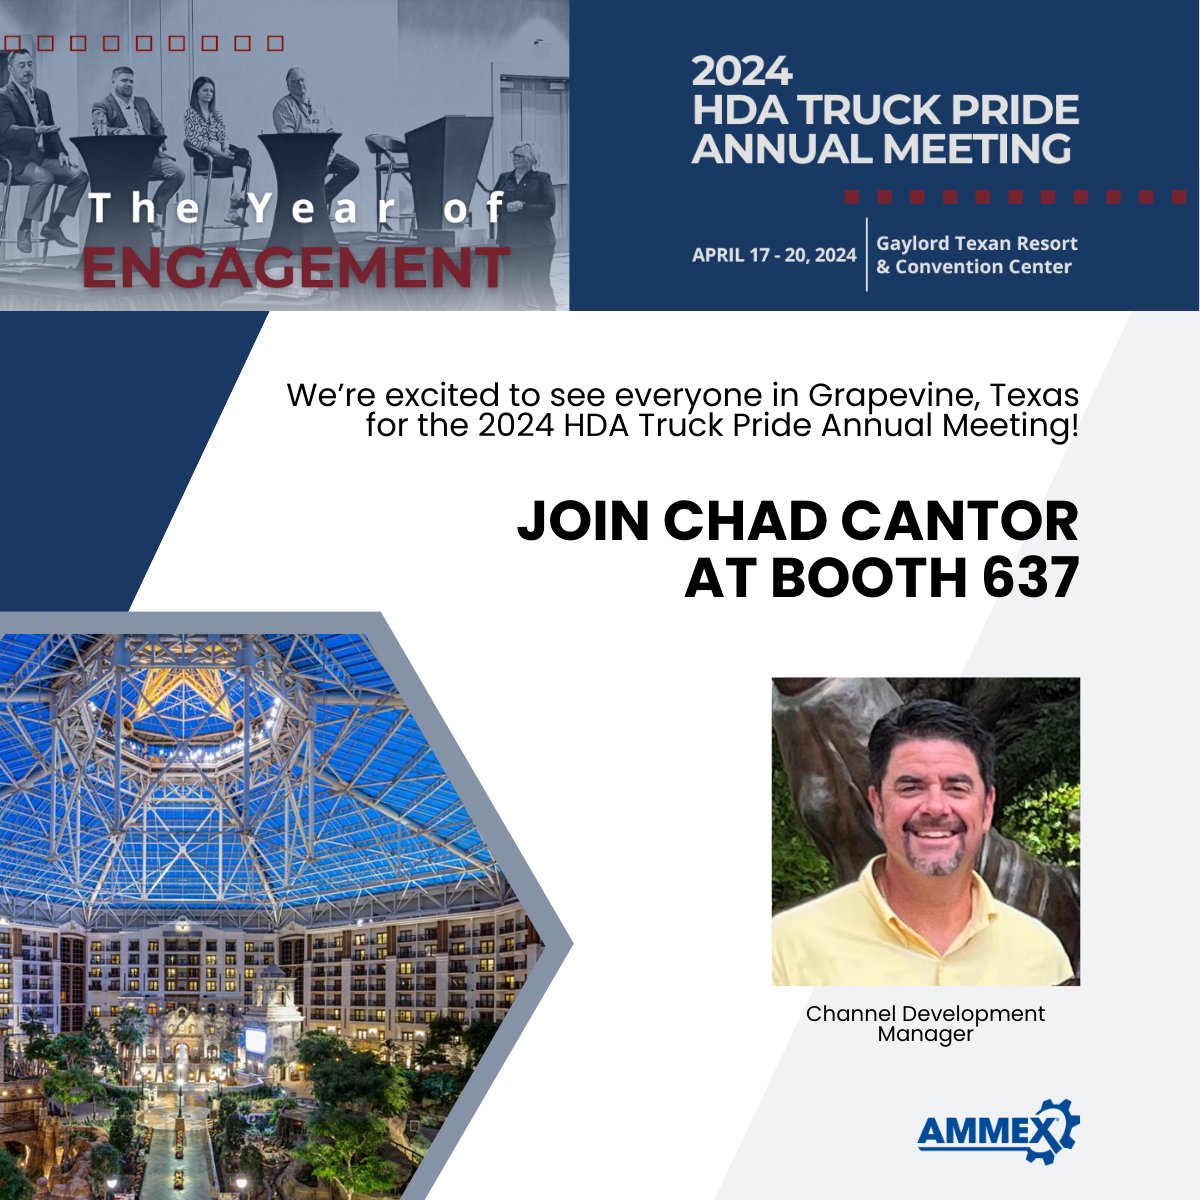 📣See you at the #HDAtruckpride Annual Meeting in Texas! @Chad Cantor will be at Booth 637!

#Automotive #DisposableGloves #HDATPAnnual24 #Industrial #PPE #Safety